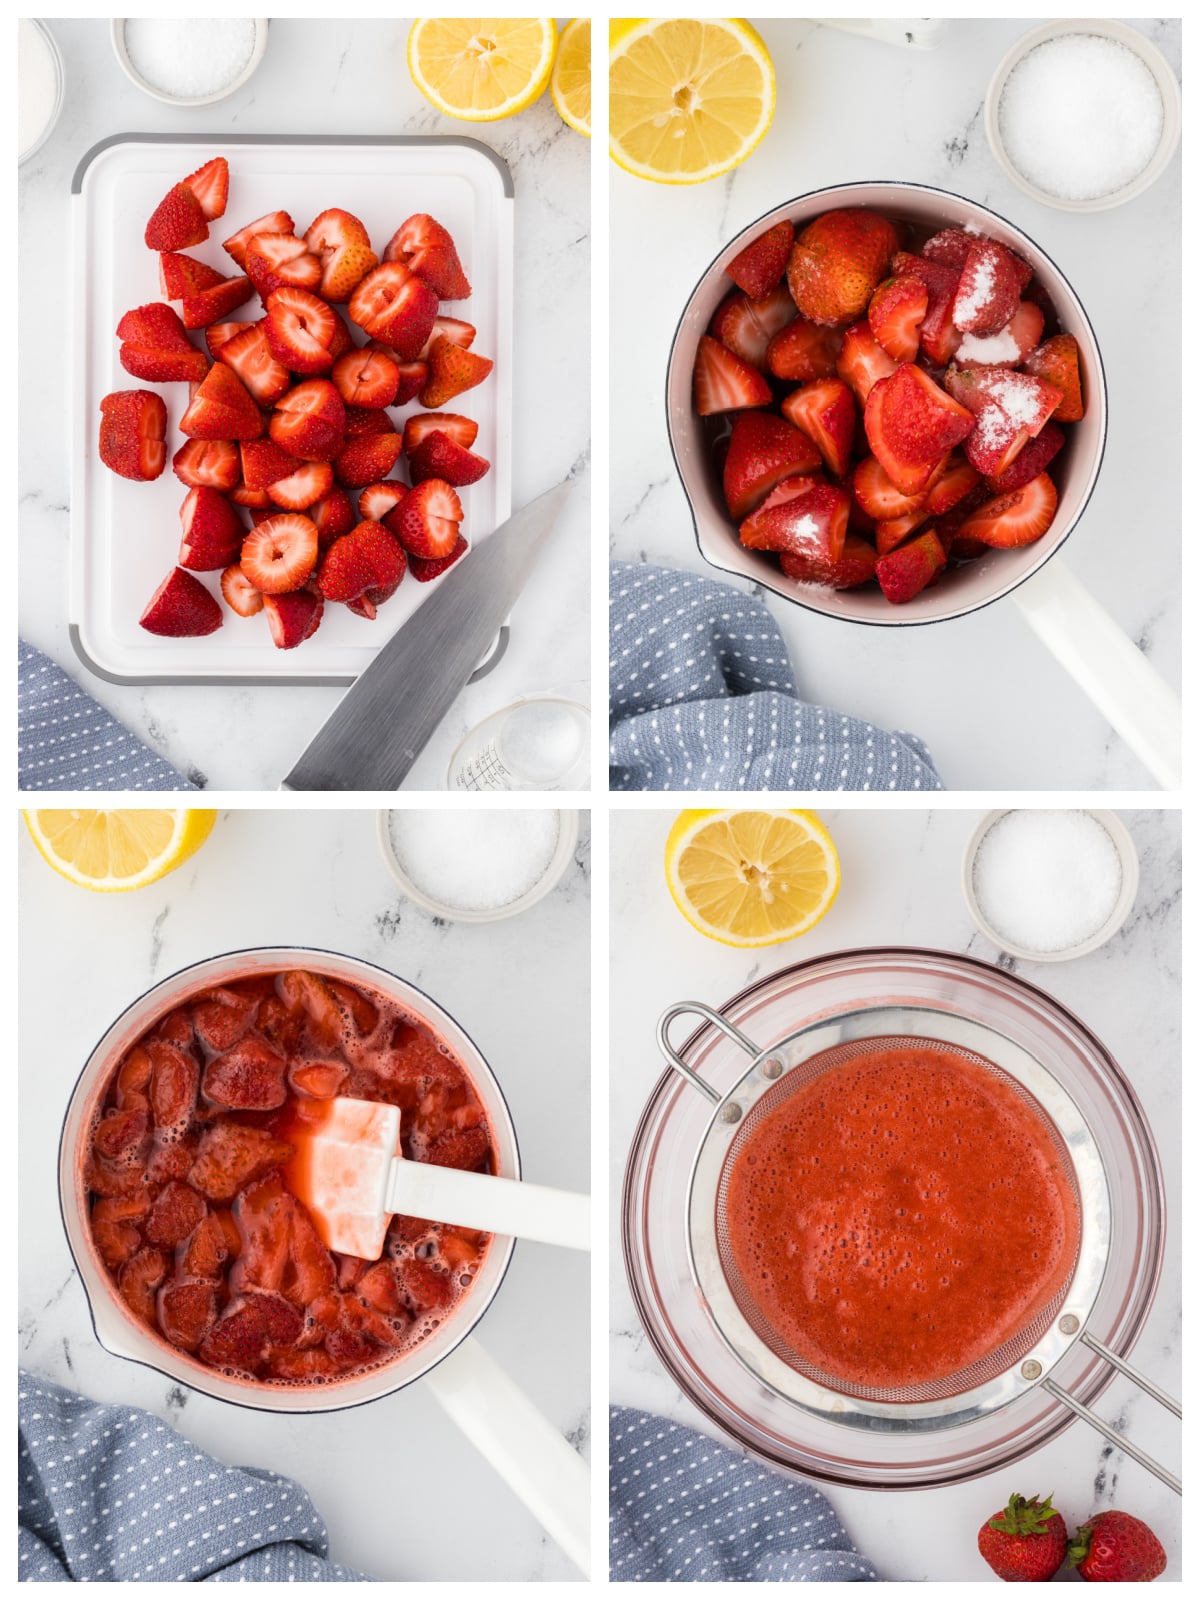 A collage of images showing how to make the recipe.